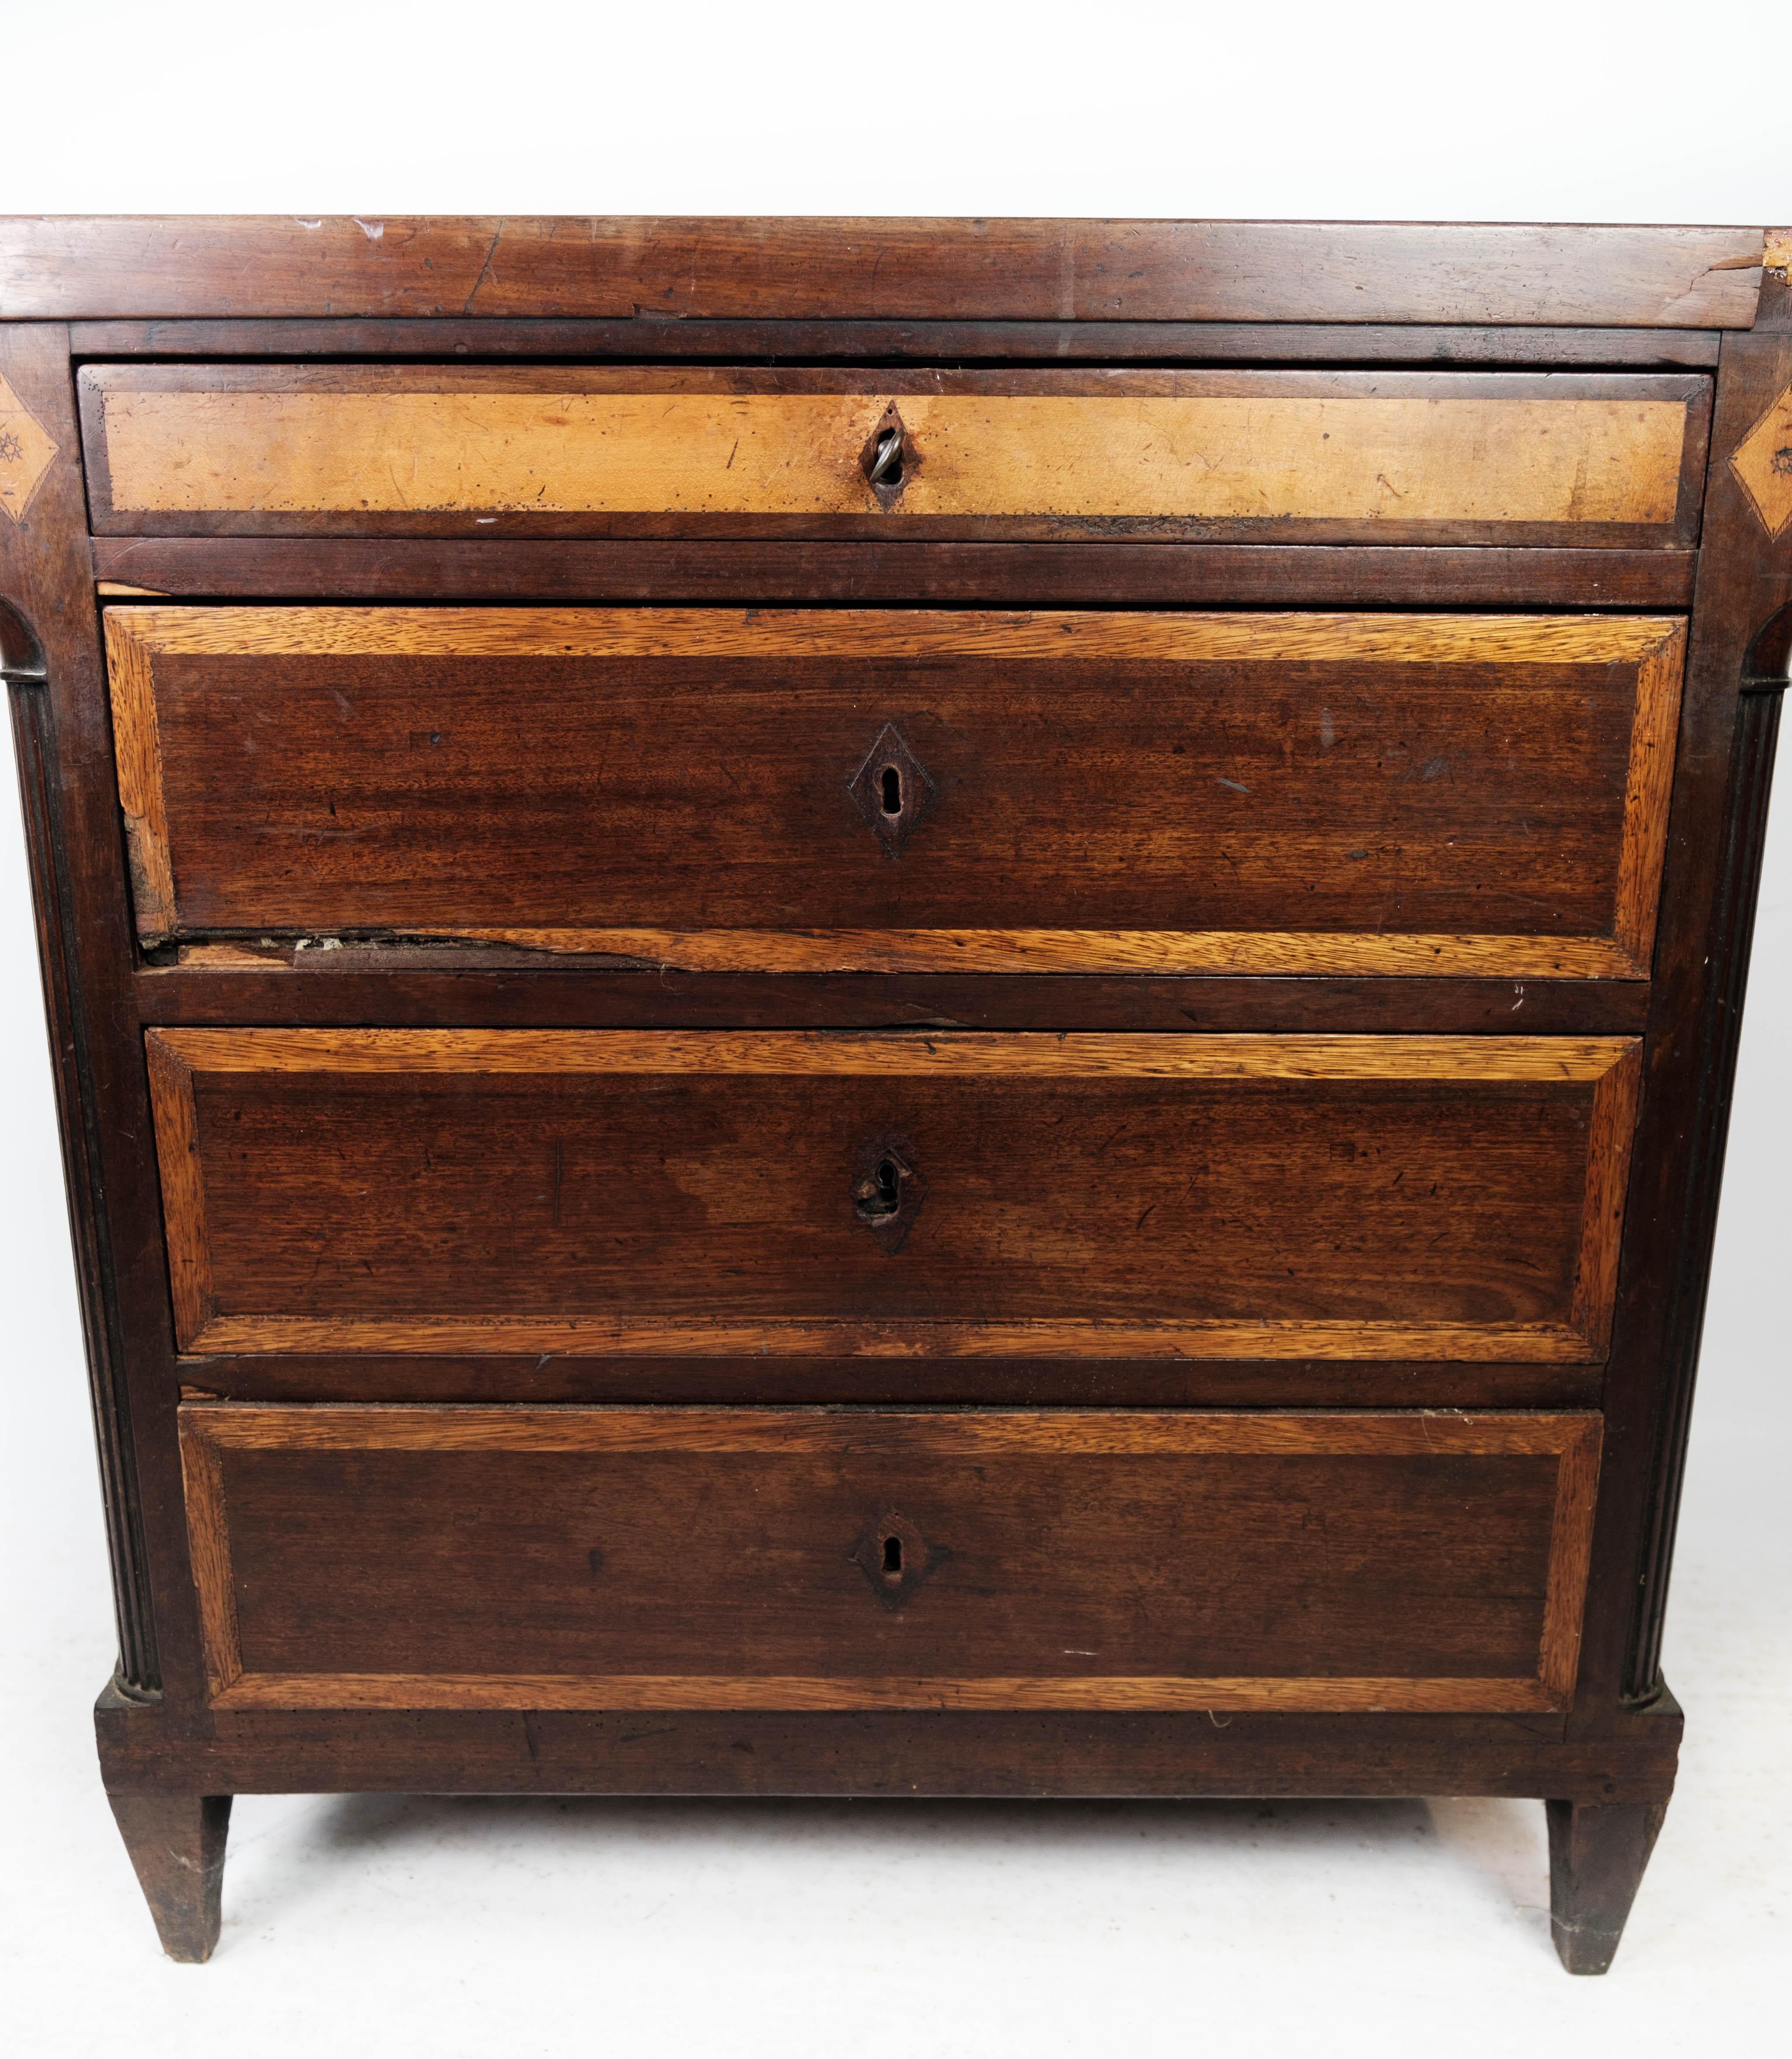 Danish Louis Seize Chest of Drawers Made In Mahogany With Inlaid Wood From 1790s For Sale